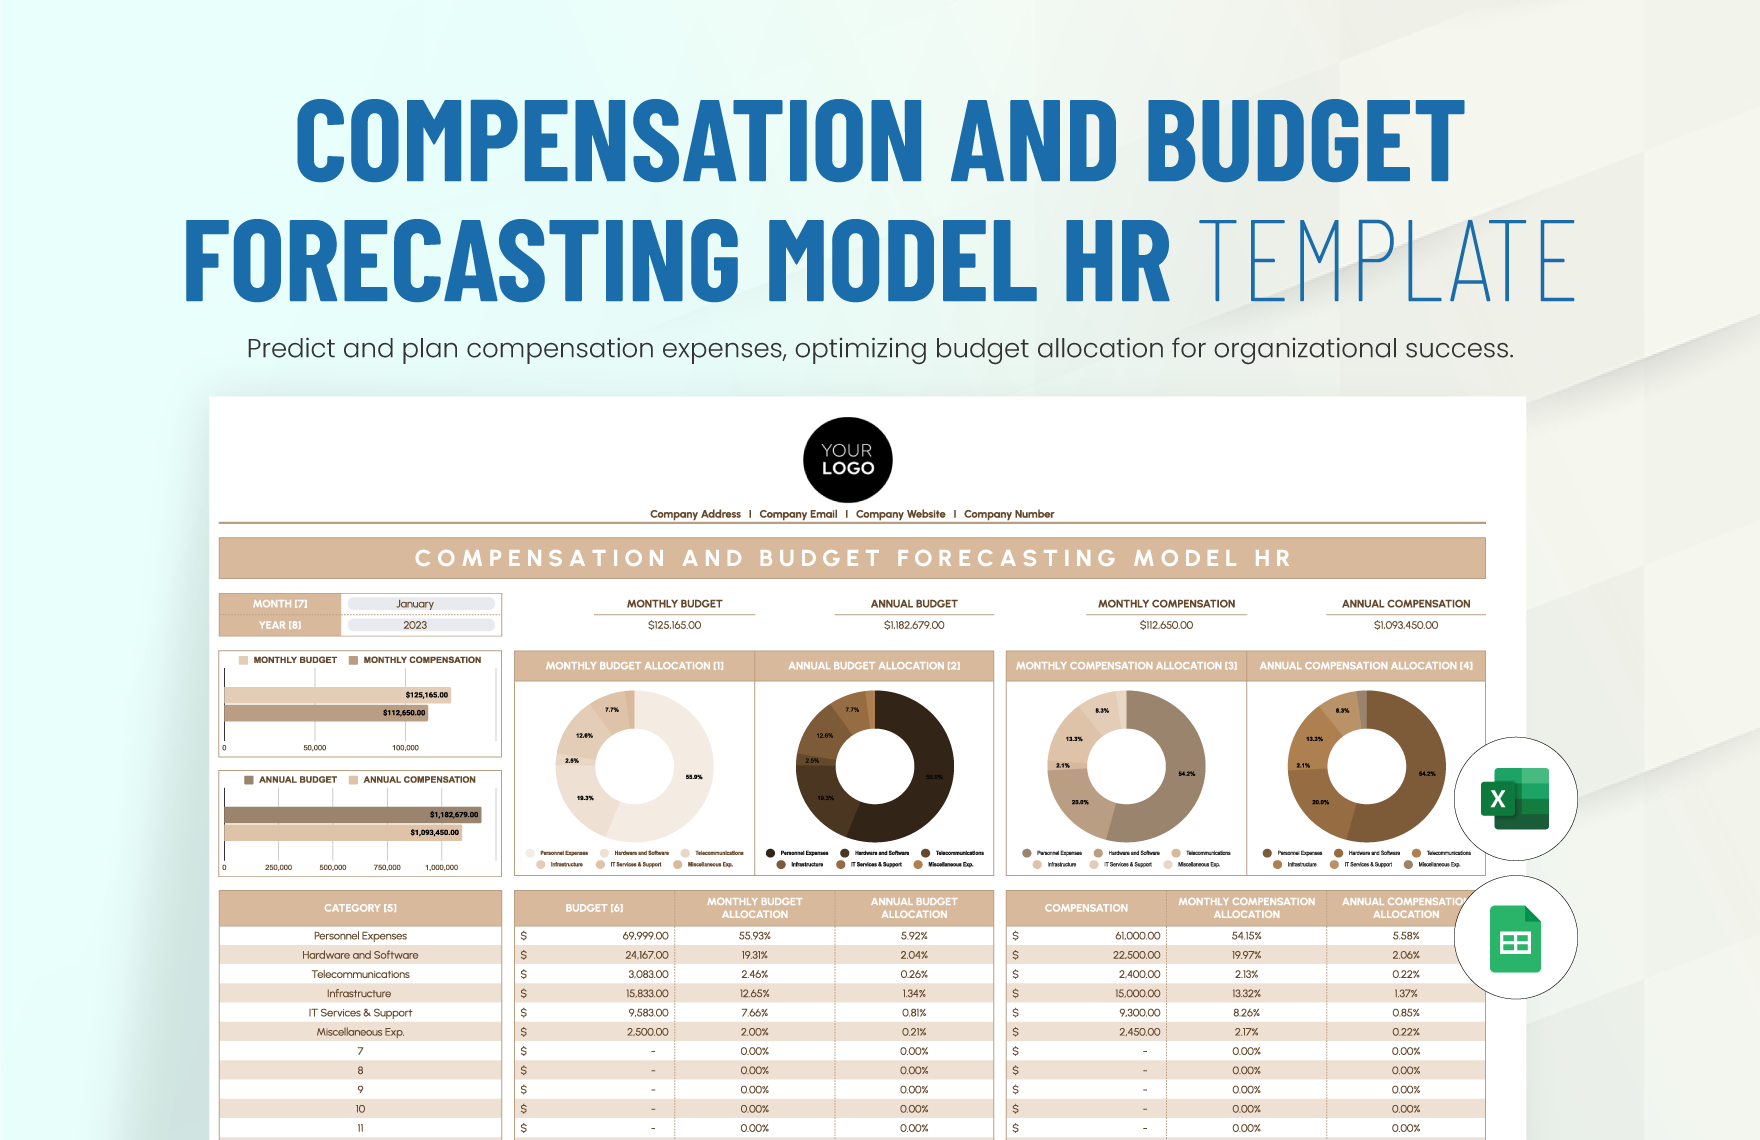 Compensation and Budget Forecasting Model HR Template